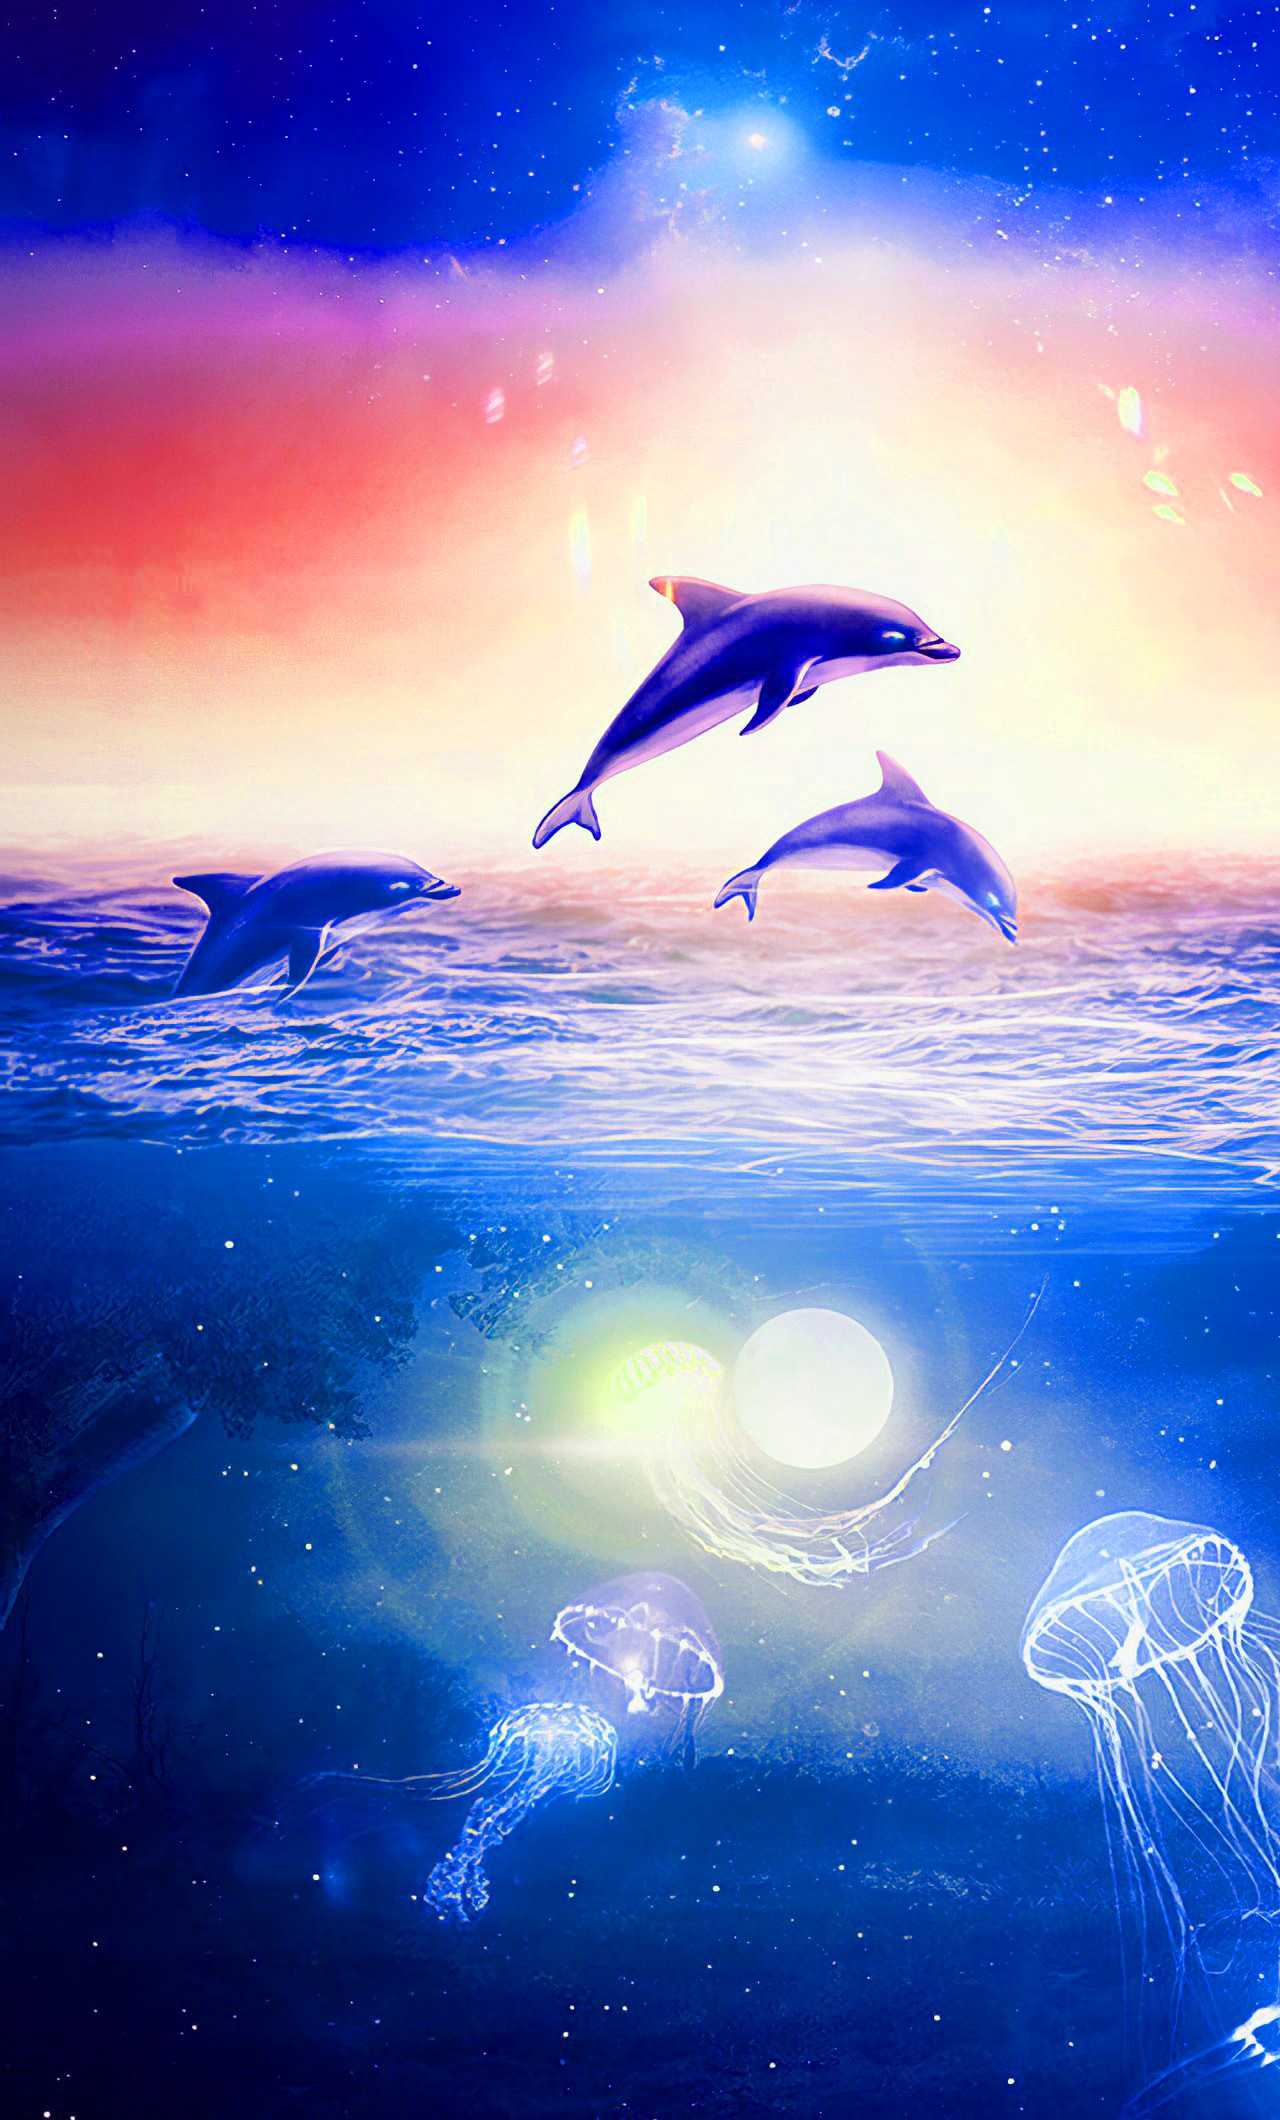 Images By Wacky Habitat | Underwater wallpaper, Dolphin images, Beautiful  sea creatures